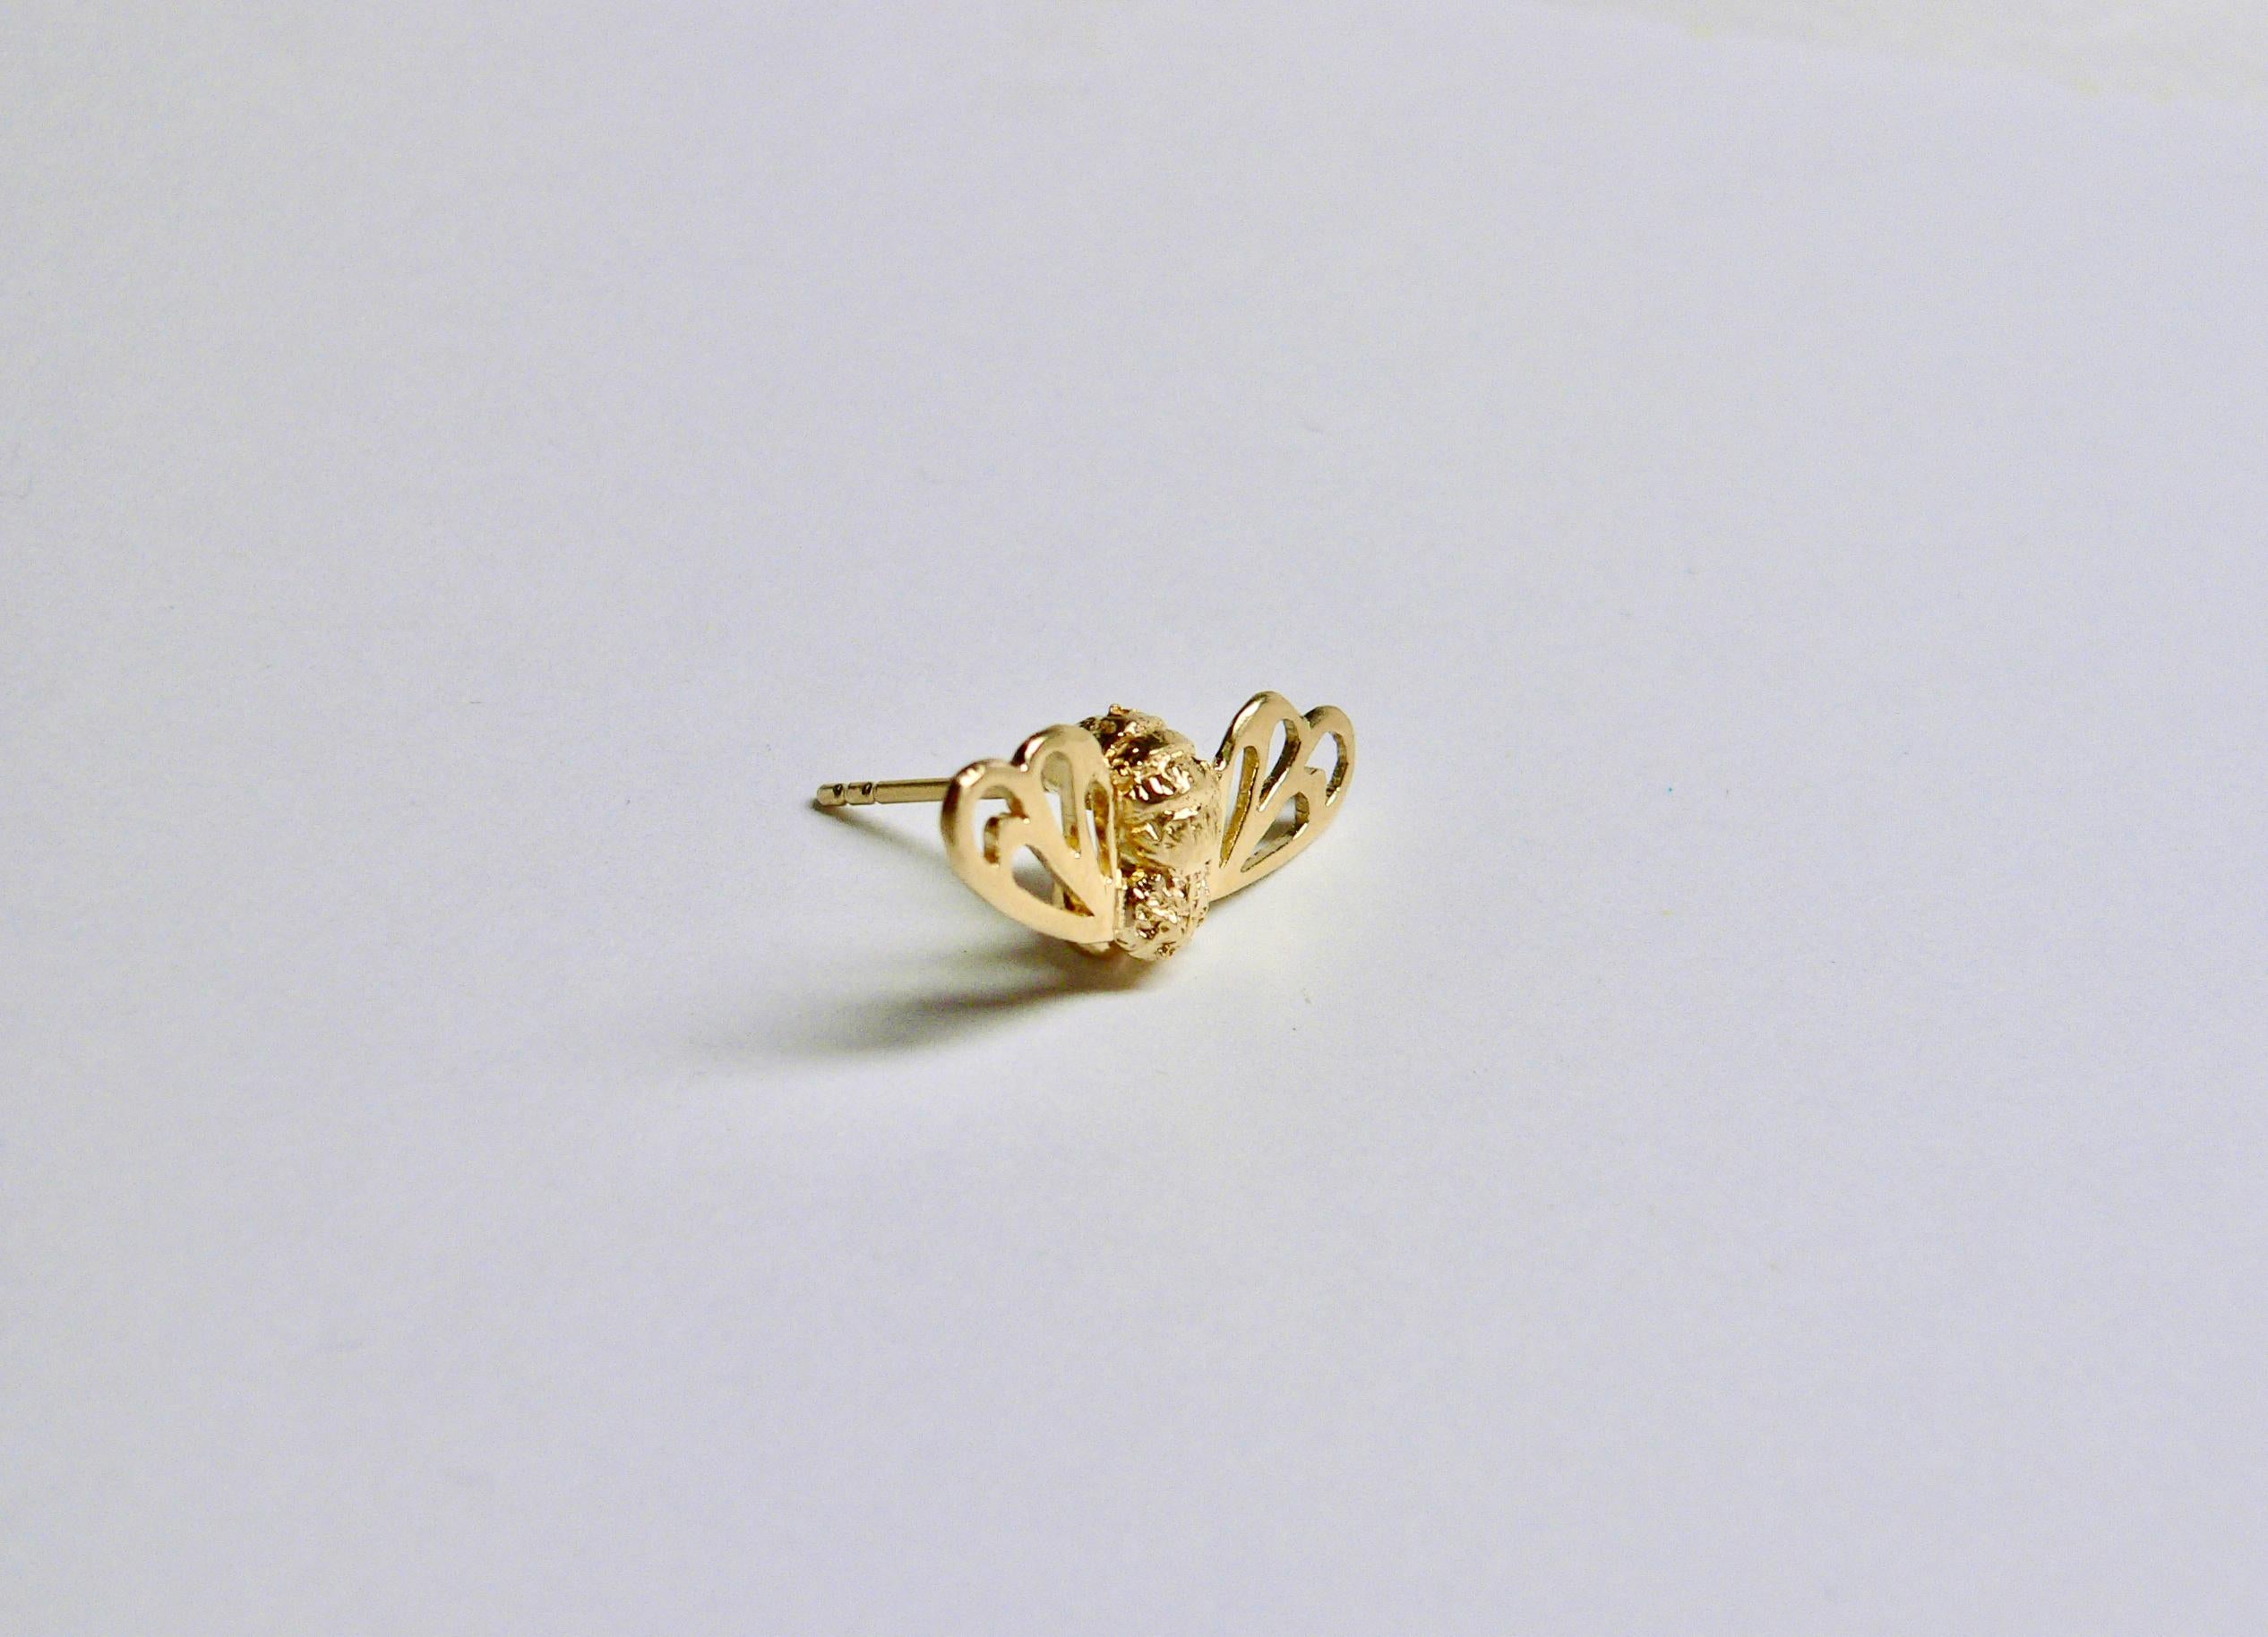 Bee earring from Bee Collection is made of Sterling Silver with 18 Karat gold plated. It is a motif of honey bee stinging.

The size is about 11mm length, 22mm width, 20mm depth (included post length) and 3grams of this item.